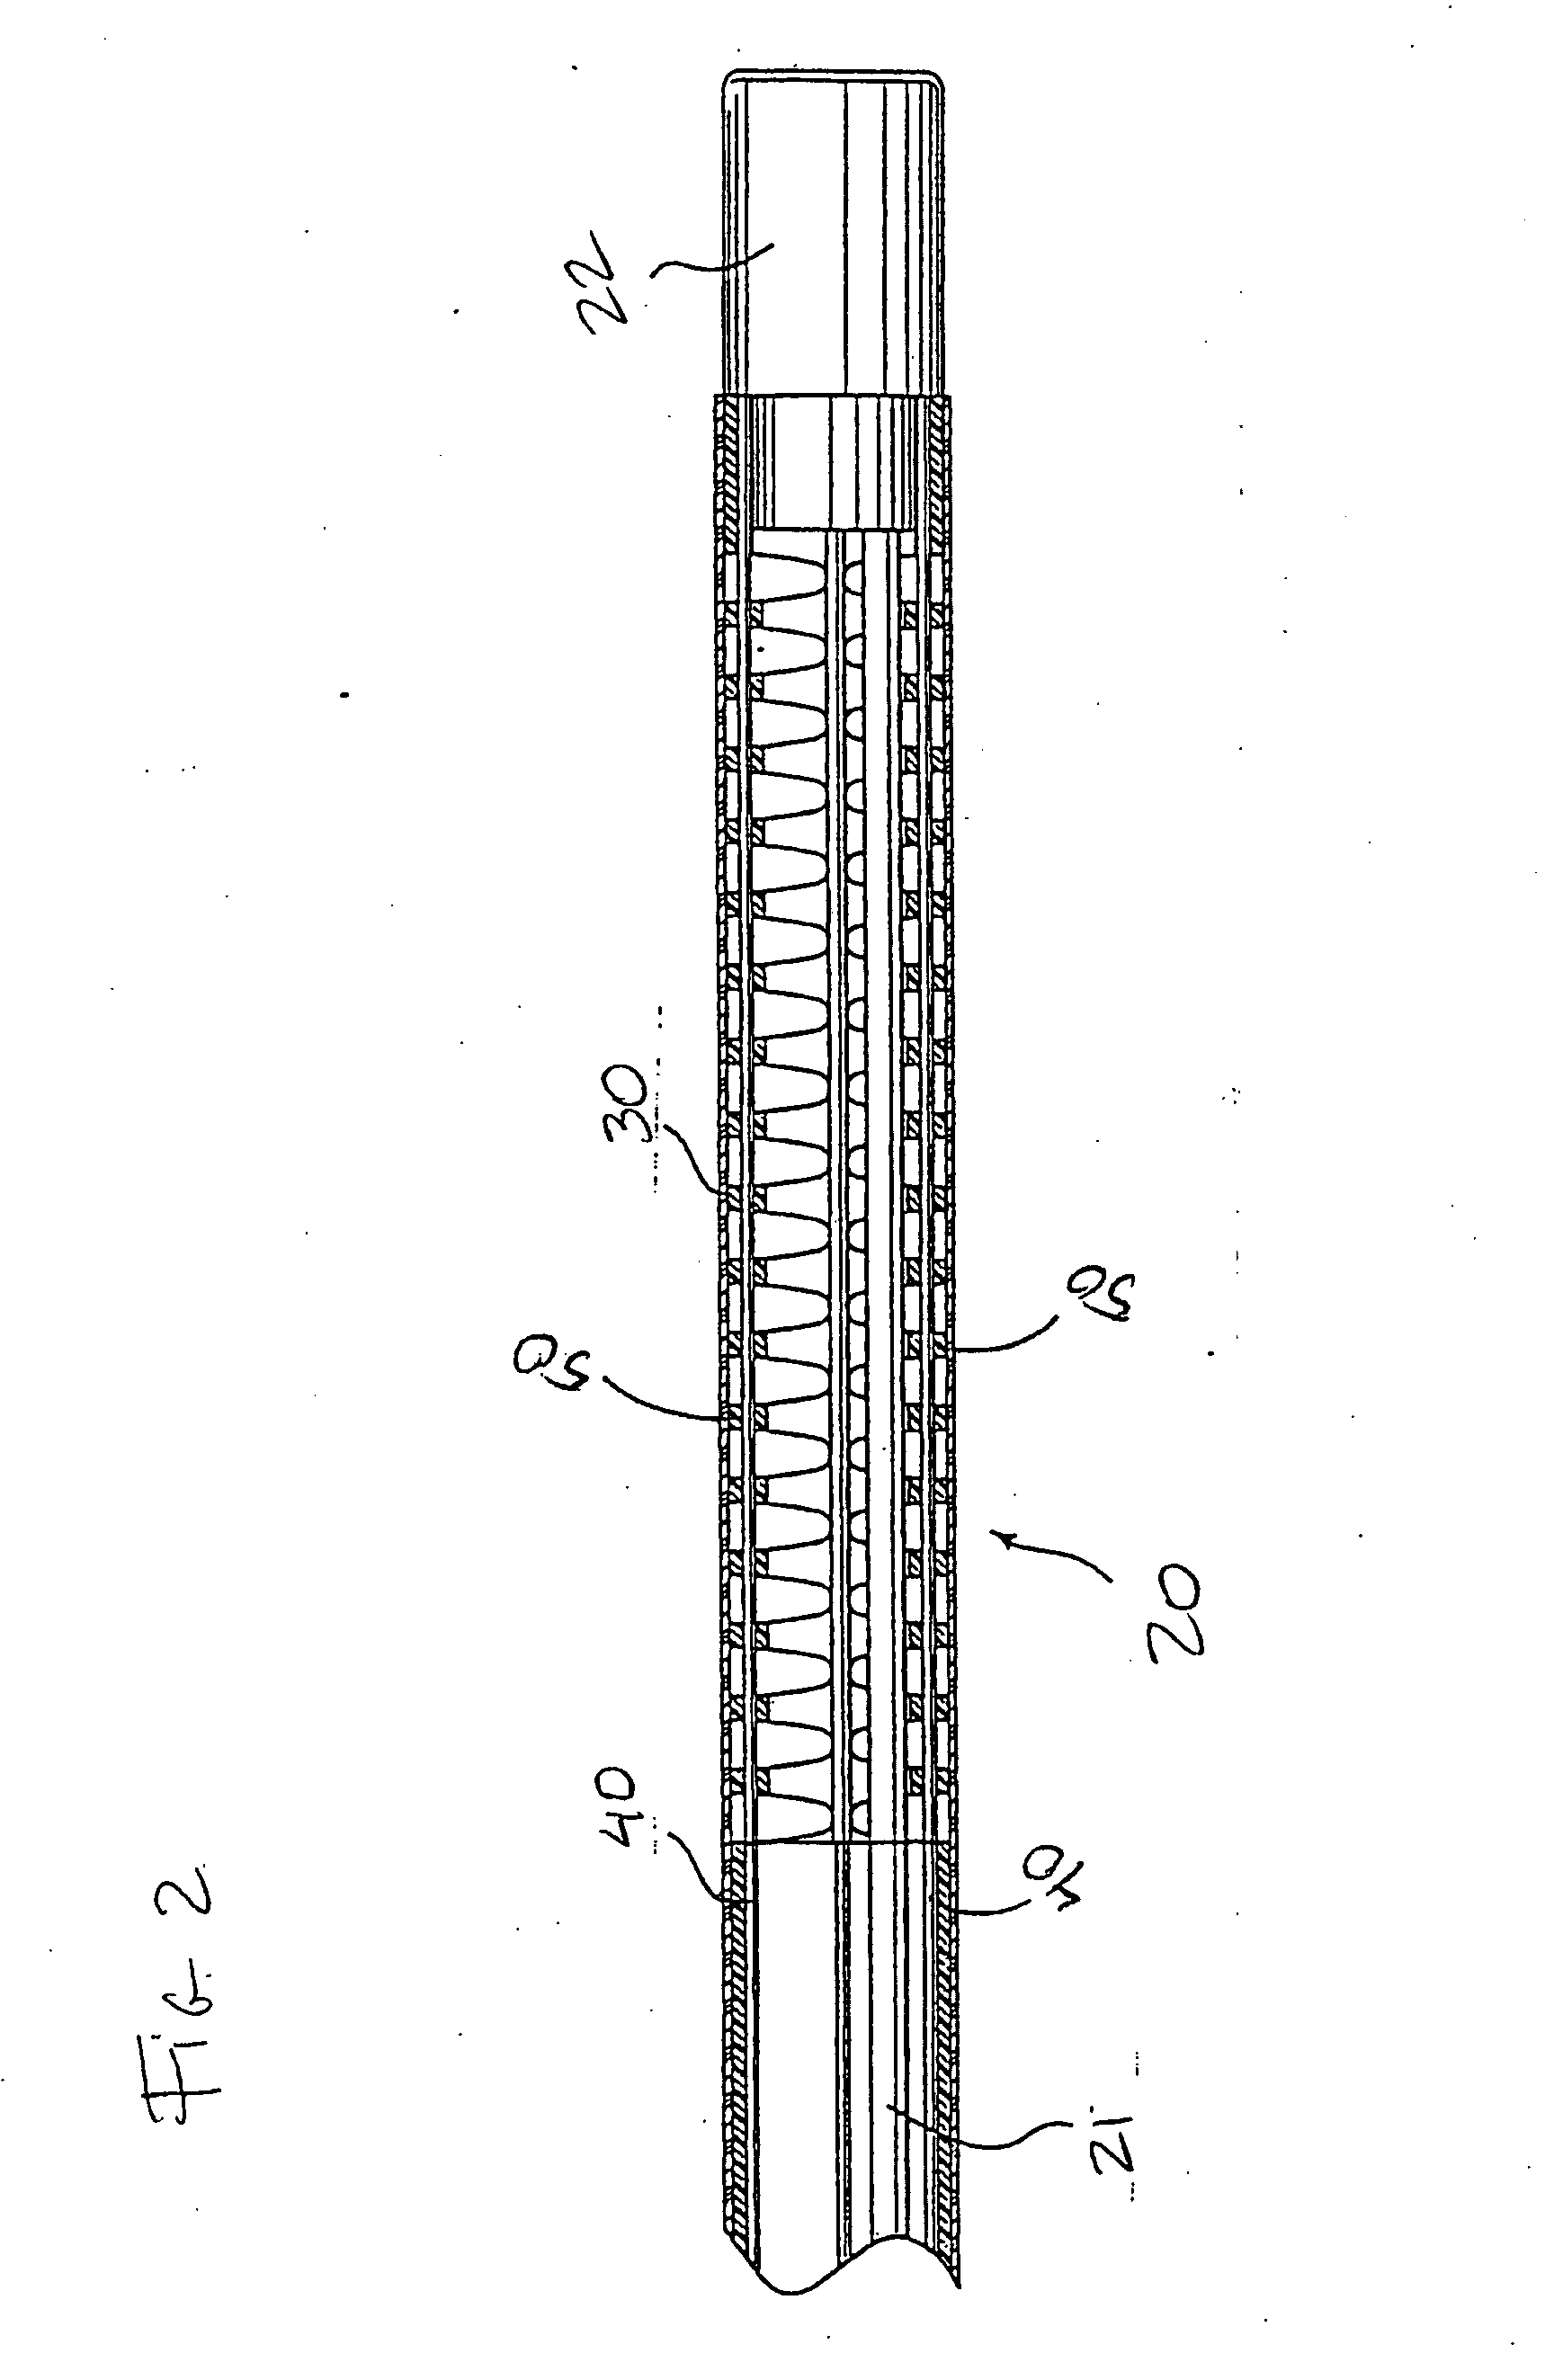 Method for forming an endoscope articulation joint